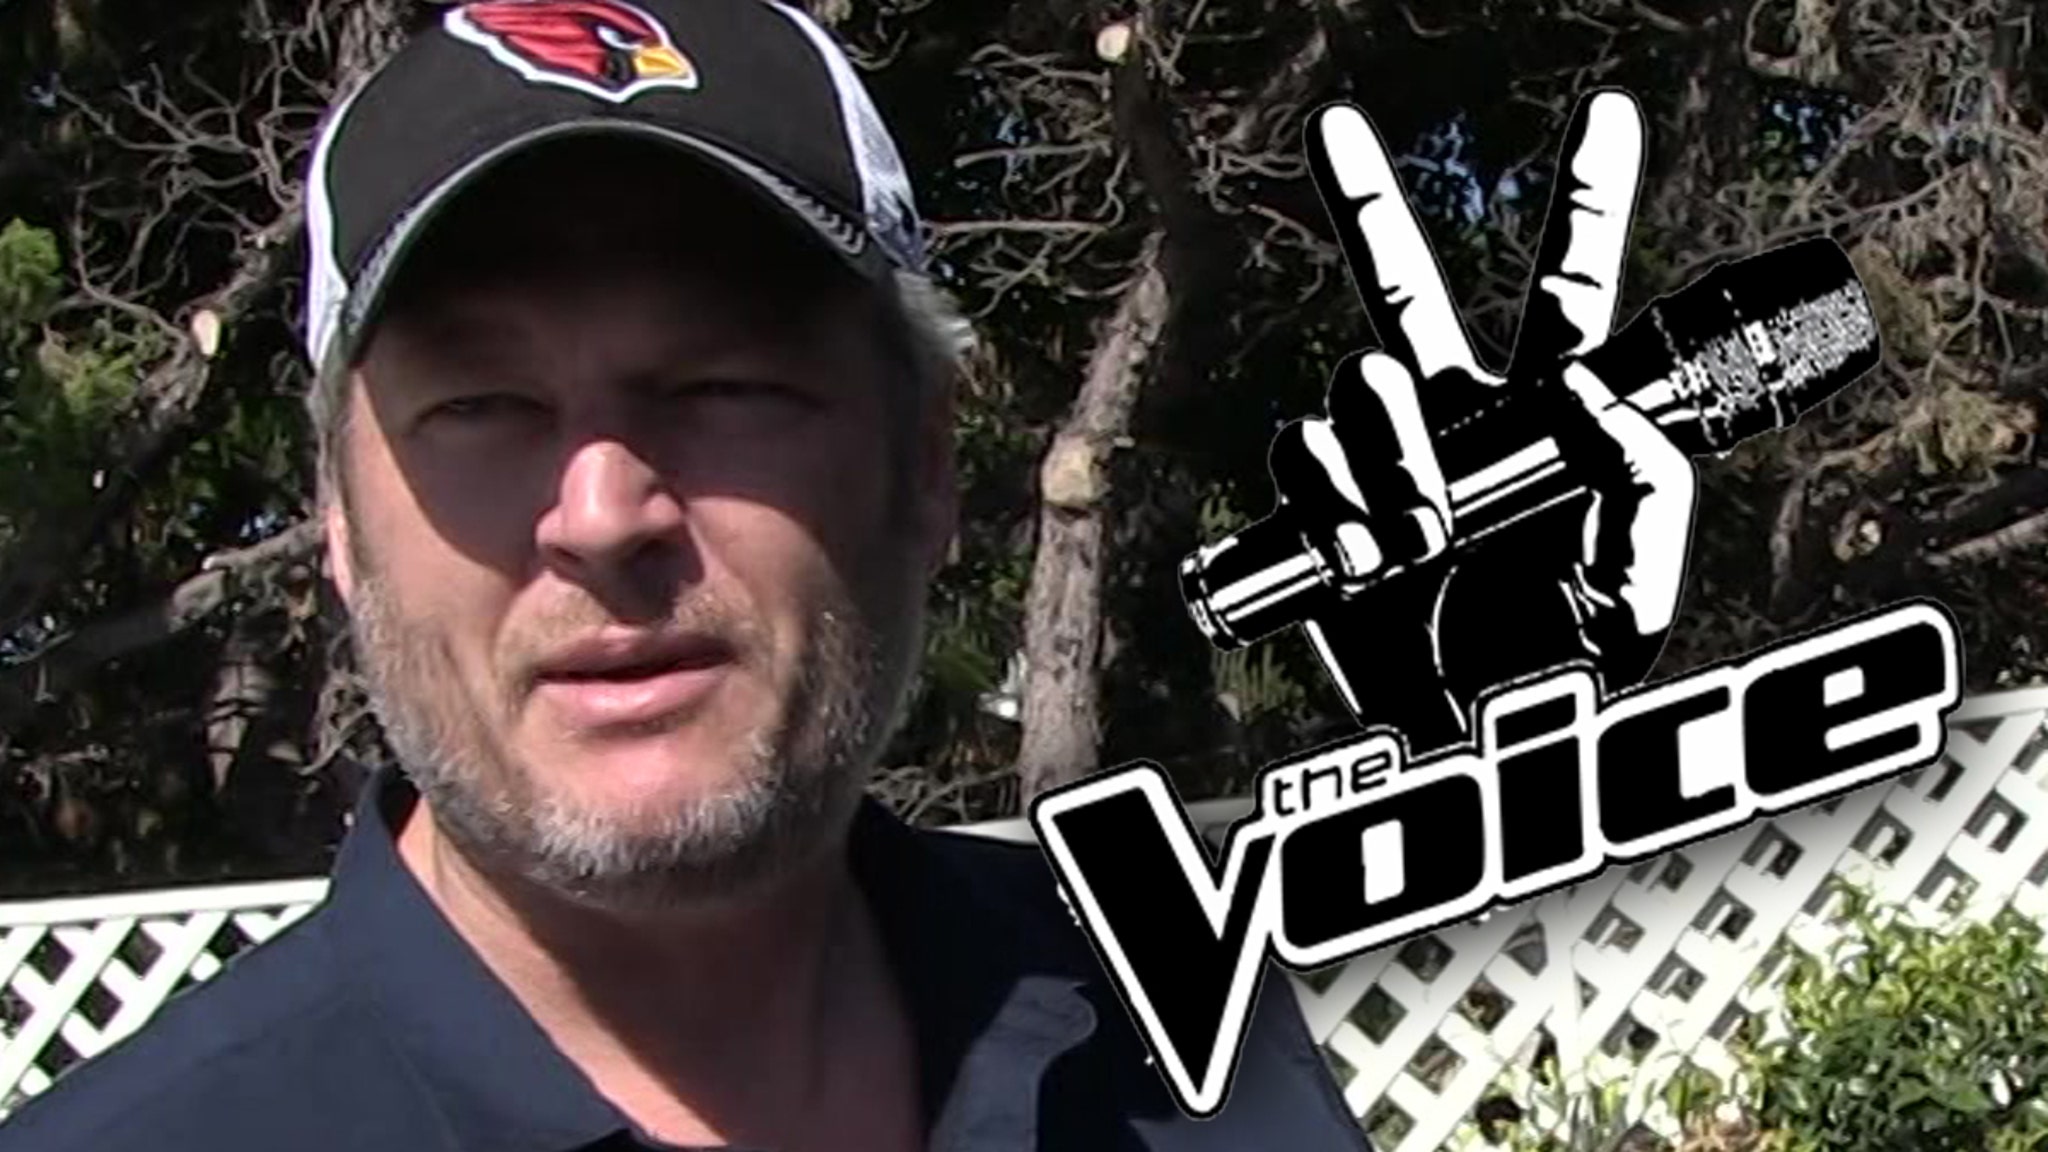 Blake Shelton leaves 'The Voice' after 12 years